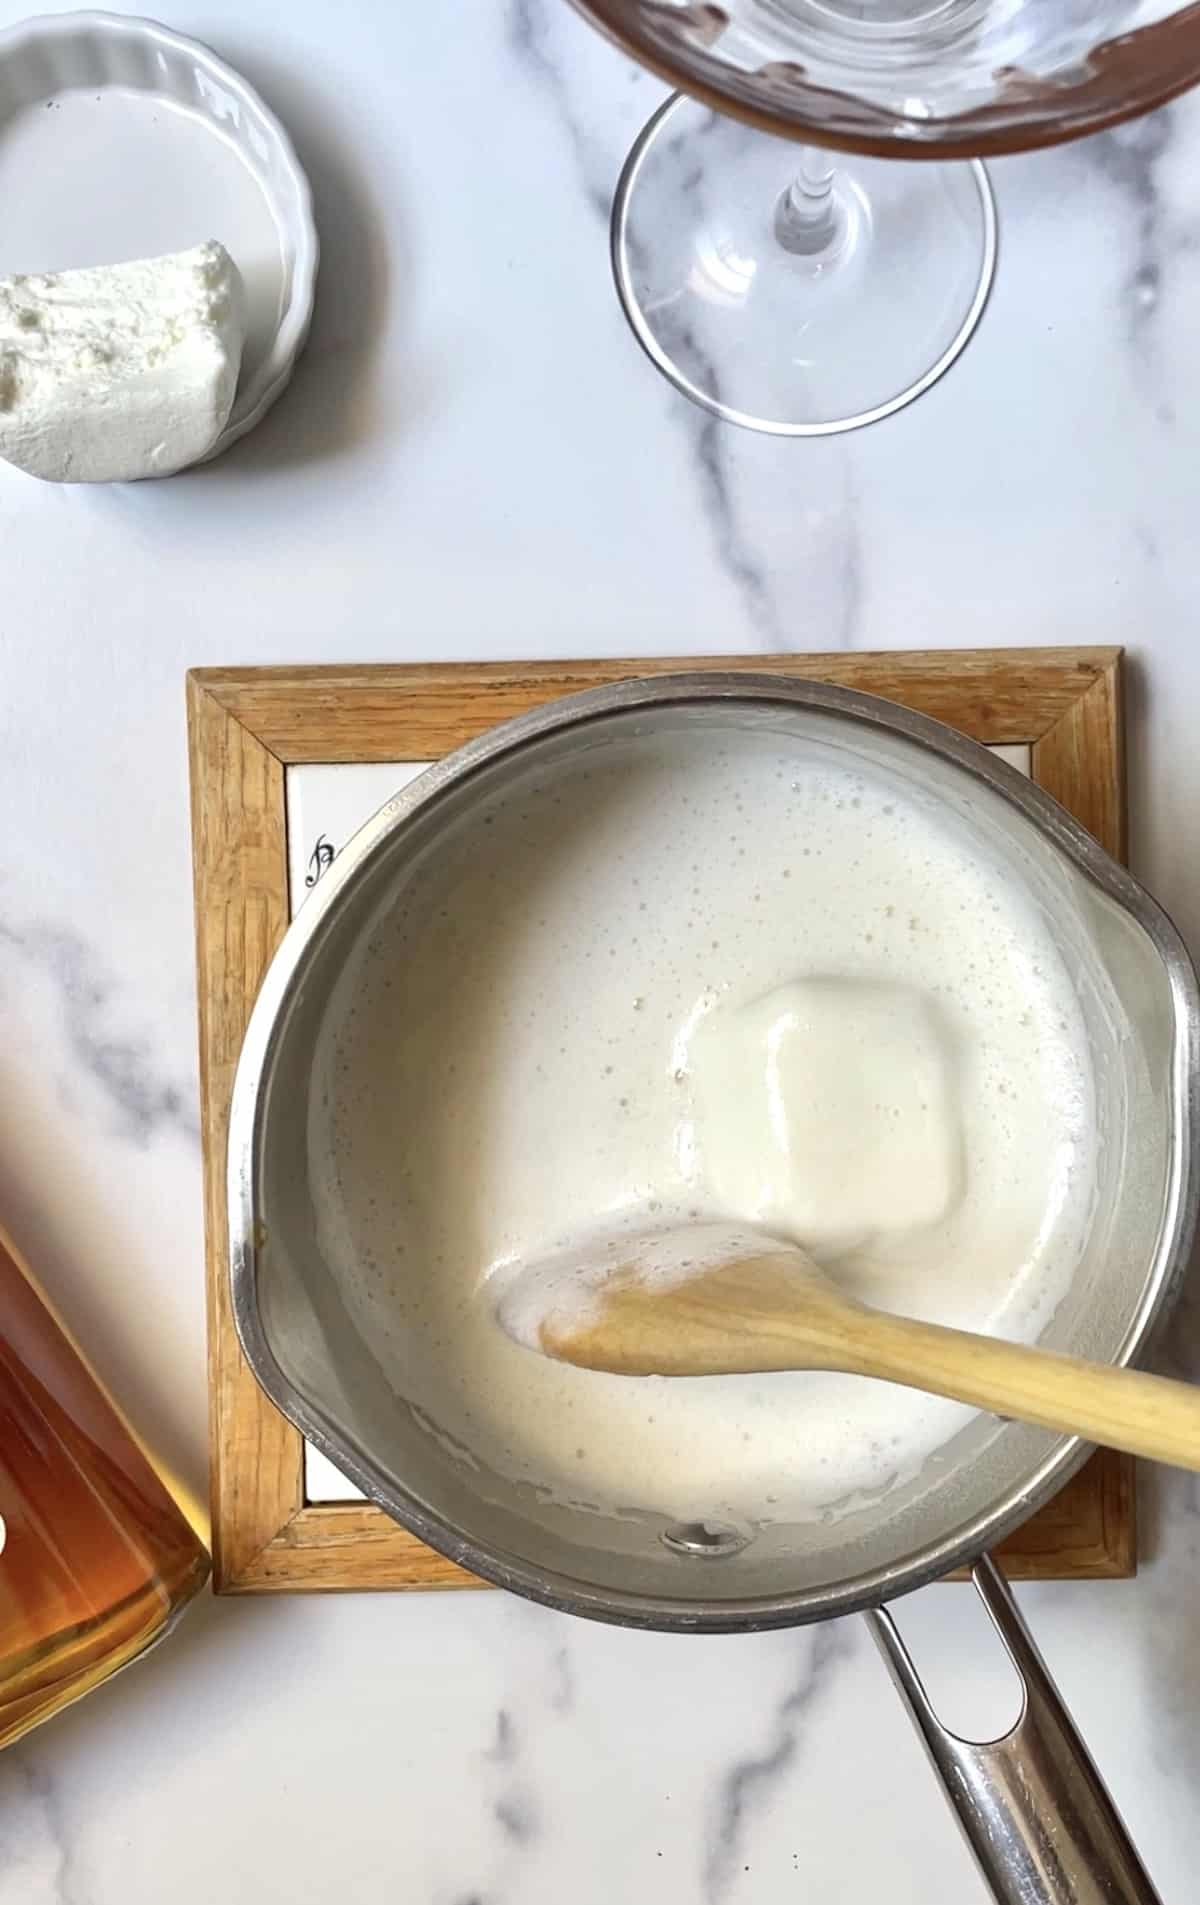 Melted marshmallow in pan with wooden spoon.